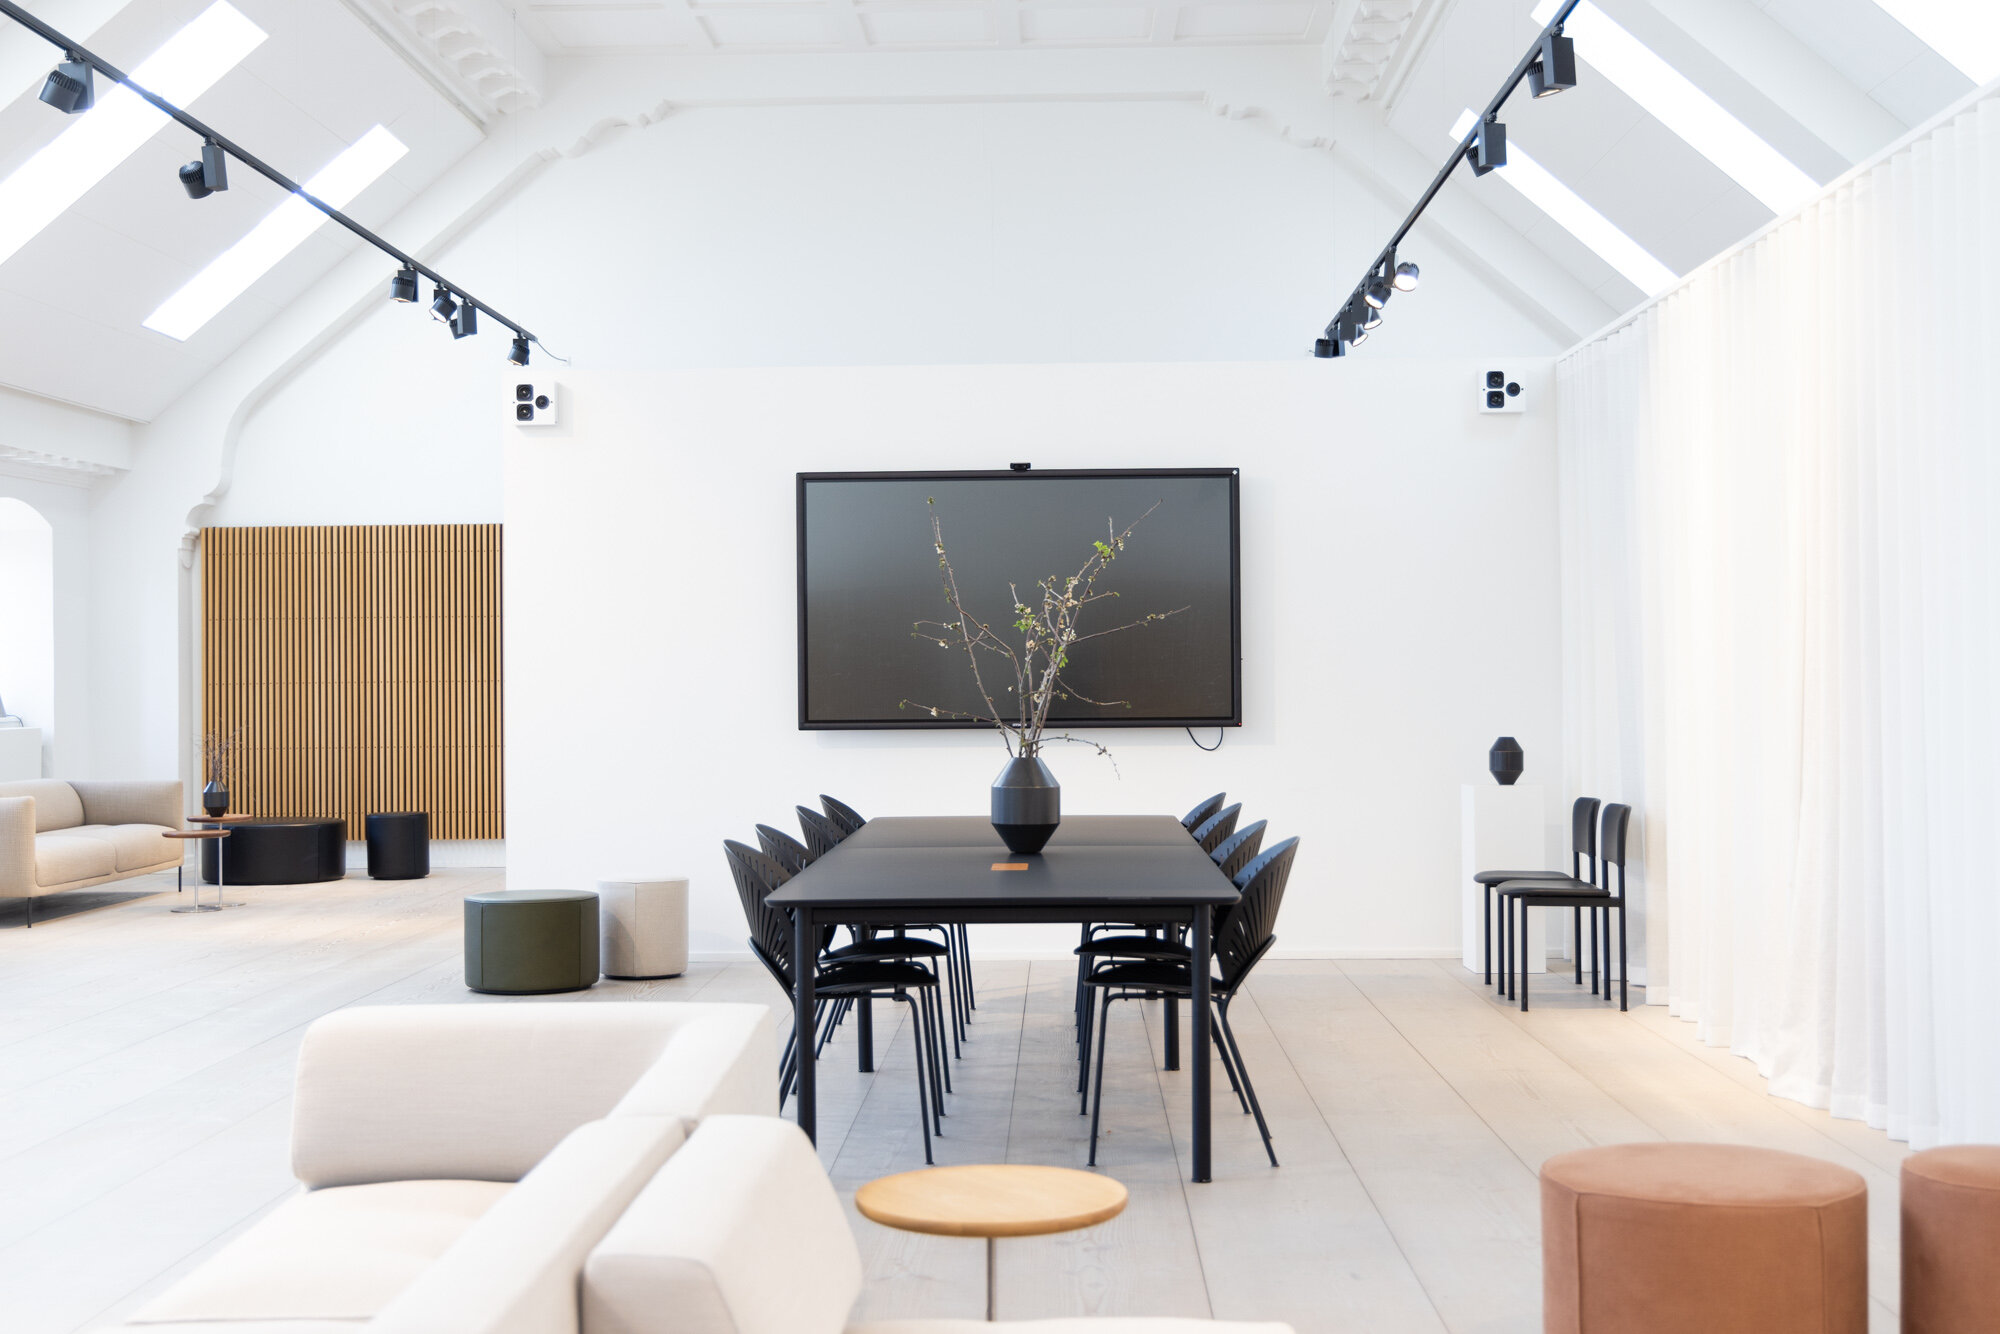 Located in the city centre of Copenhagen, customers can experience the sound of Artcoustic alongside internationally renowned Danish furniture brand, Fredericia. 

Featuring three different systems with two speakers and a subwoofer in each, each syst